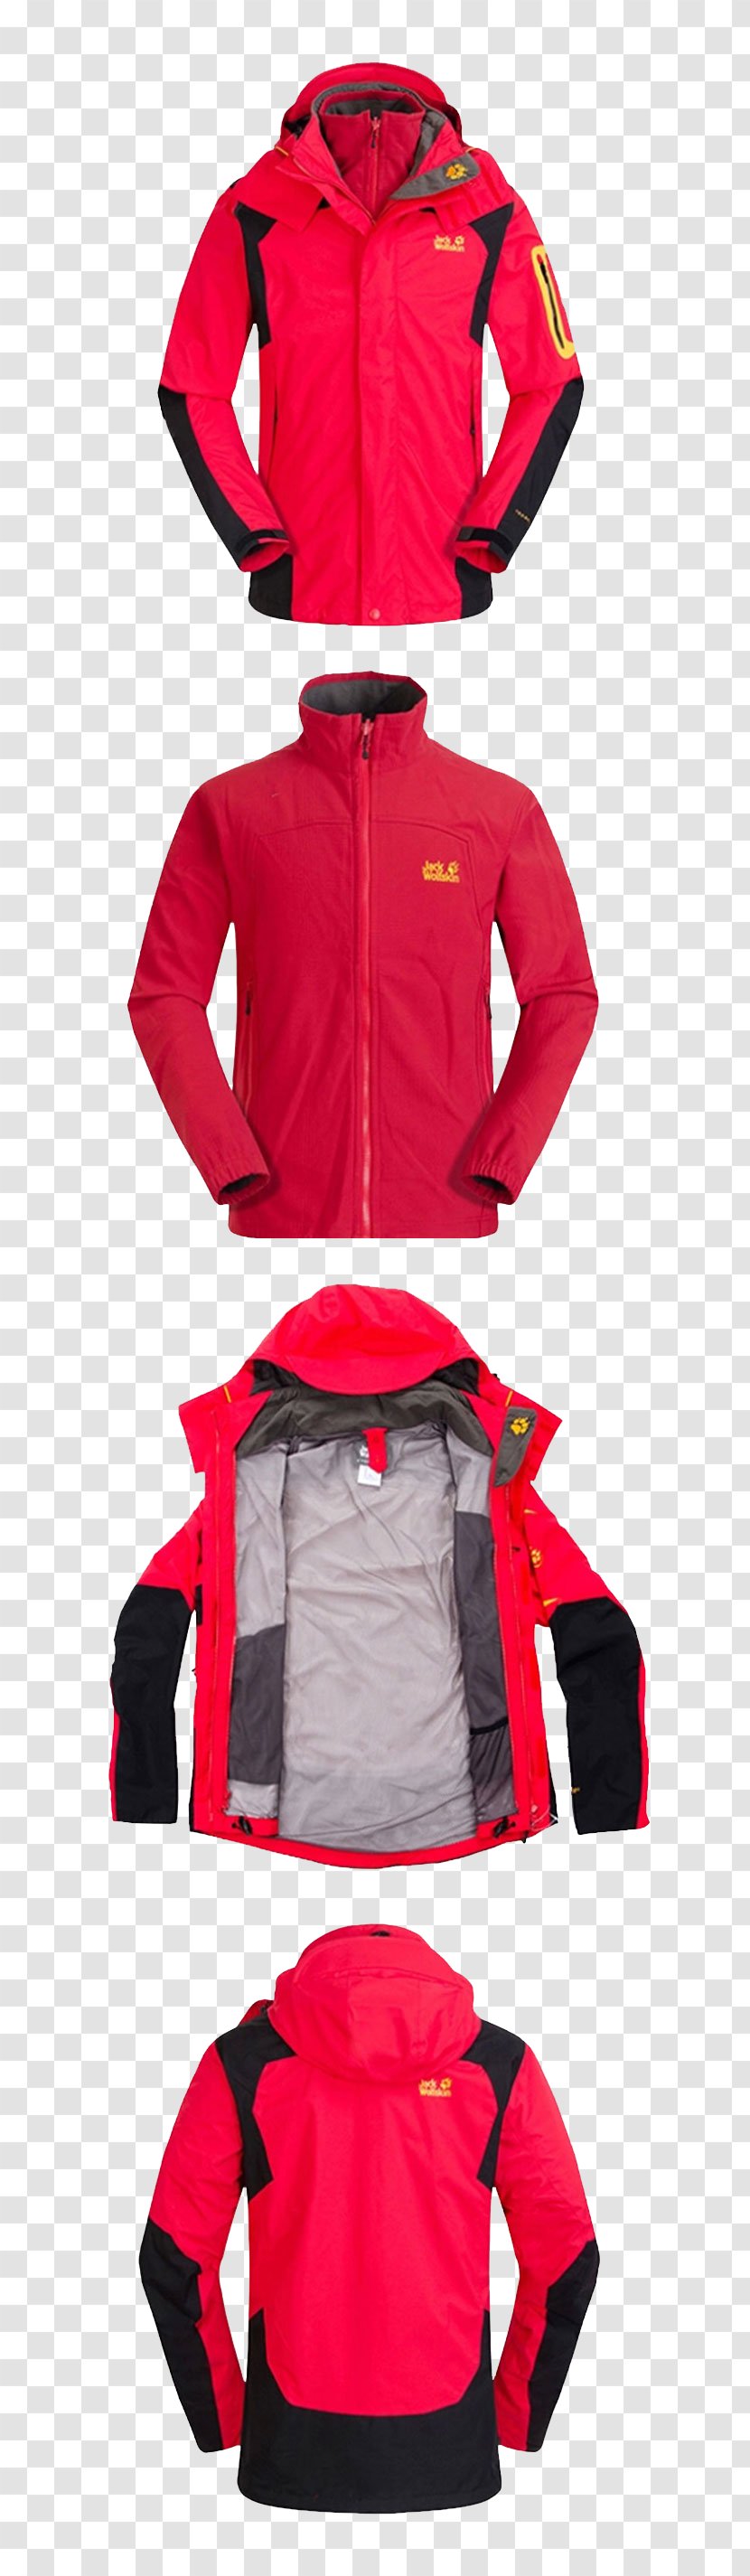 Hoodie Jacket - Product - Dewclaws Outdoor Jackets Transparent PNG